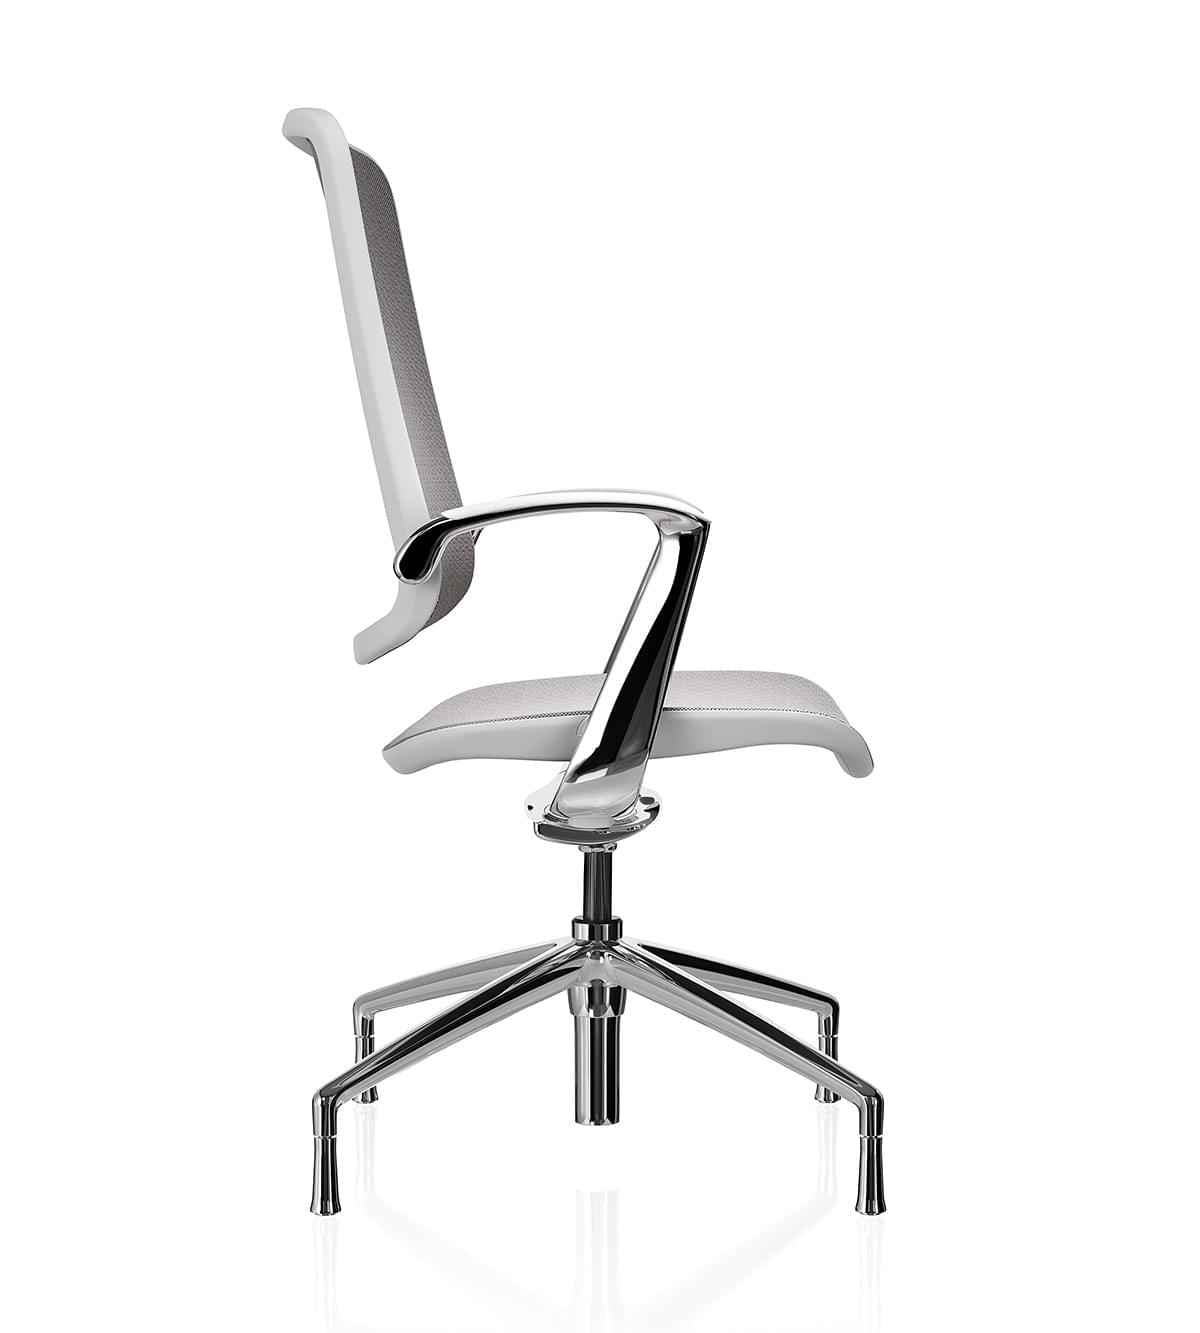 Trinetic Mesh Chair - White frame polished 4 star base with glides side